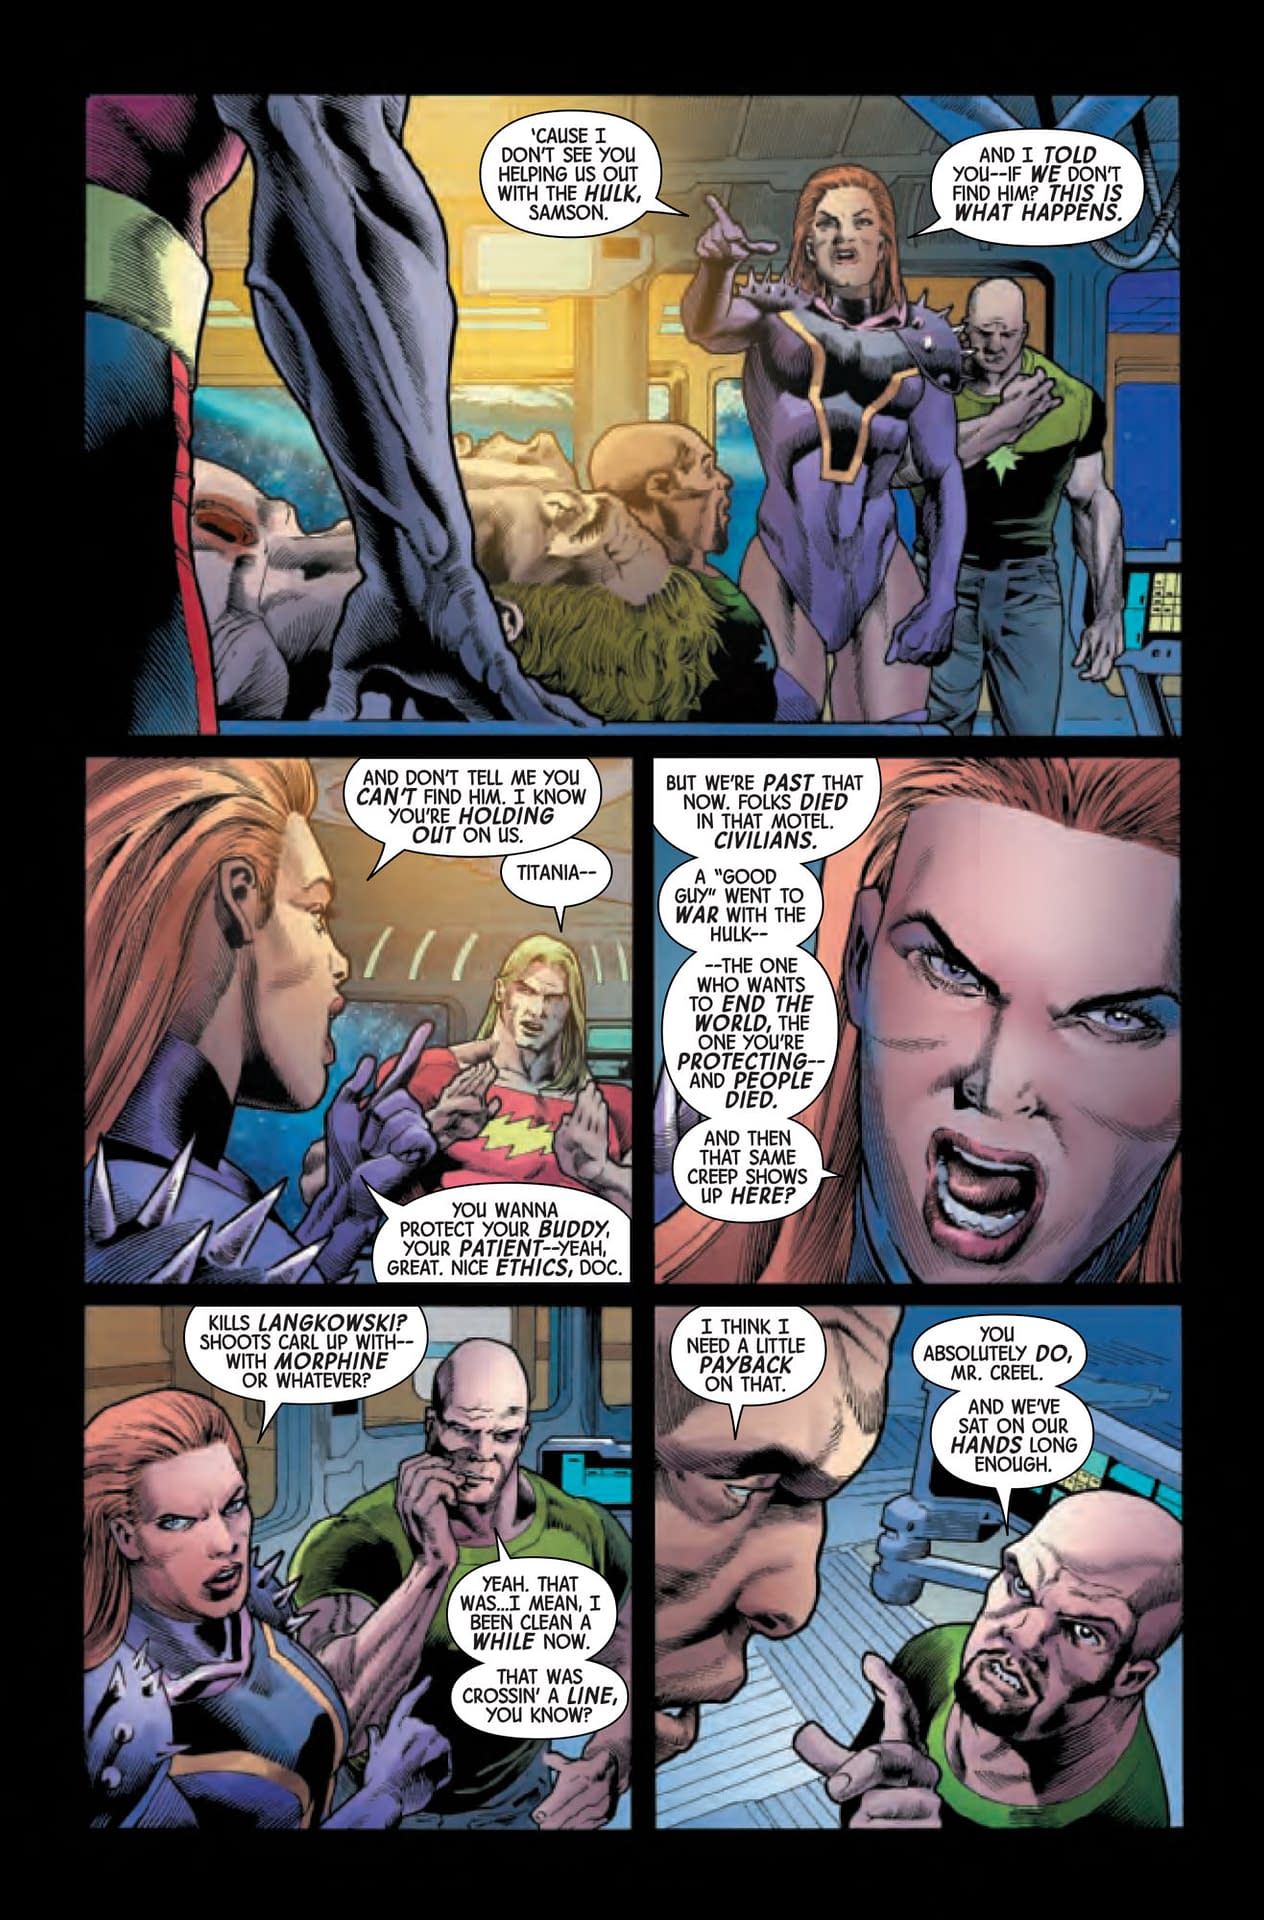 Deleted Scenes from the Democratic Debates in Immortal Hulk #22 [Preview]